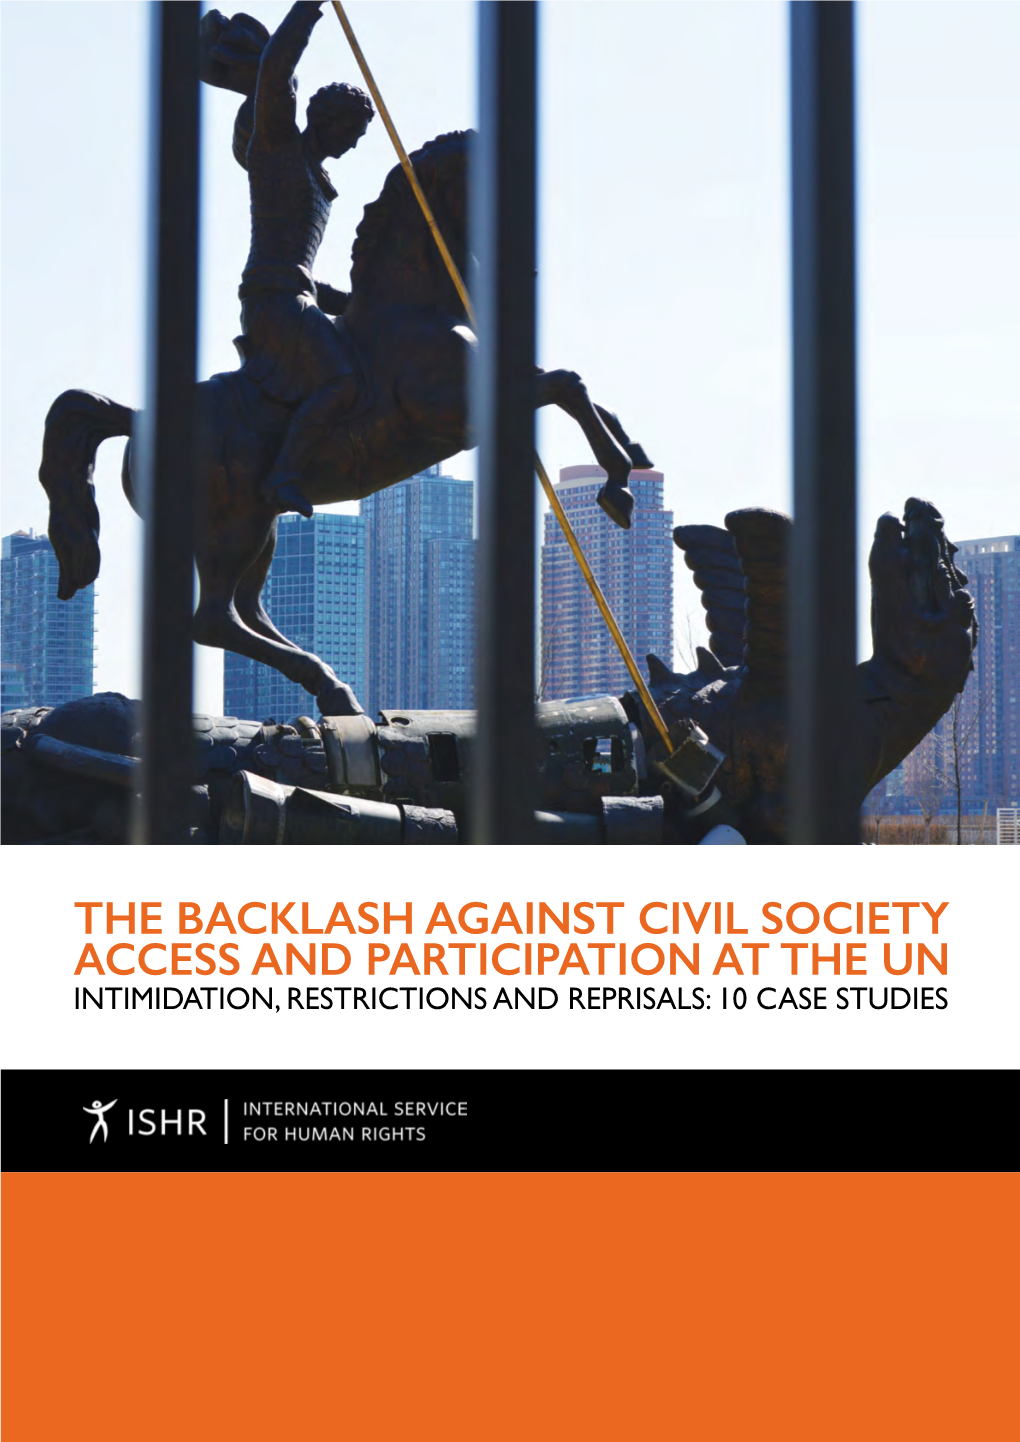 THE BACKLASH AGAINST CIVIL SOCIETY ACCESS and PARTICIPATION at the UN INTIMIDATION, RESTRICTIONS and REPRISALS: 10 CASE STUDIES Contents